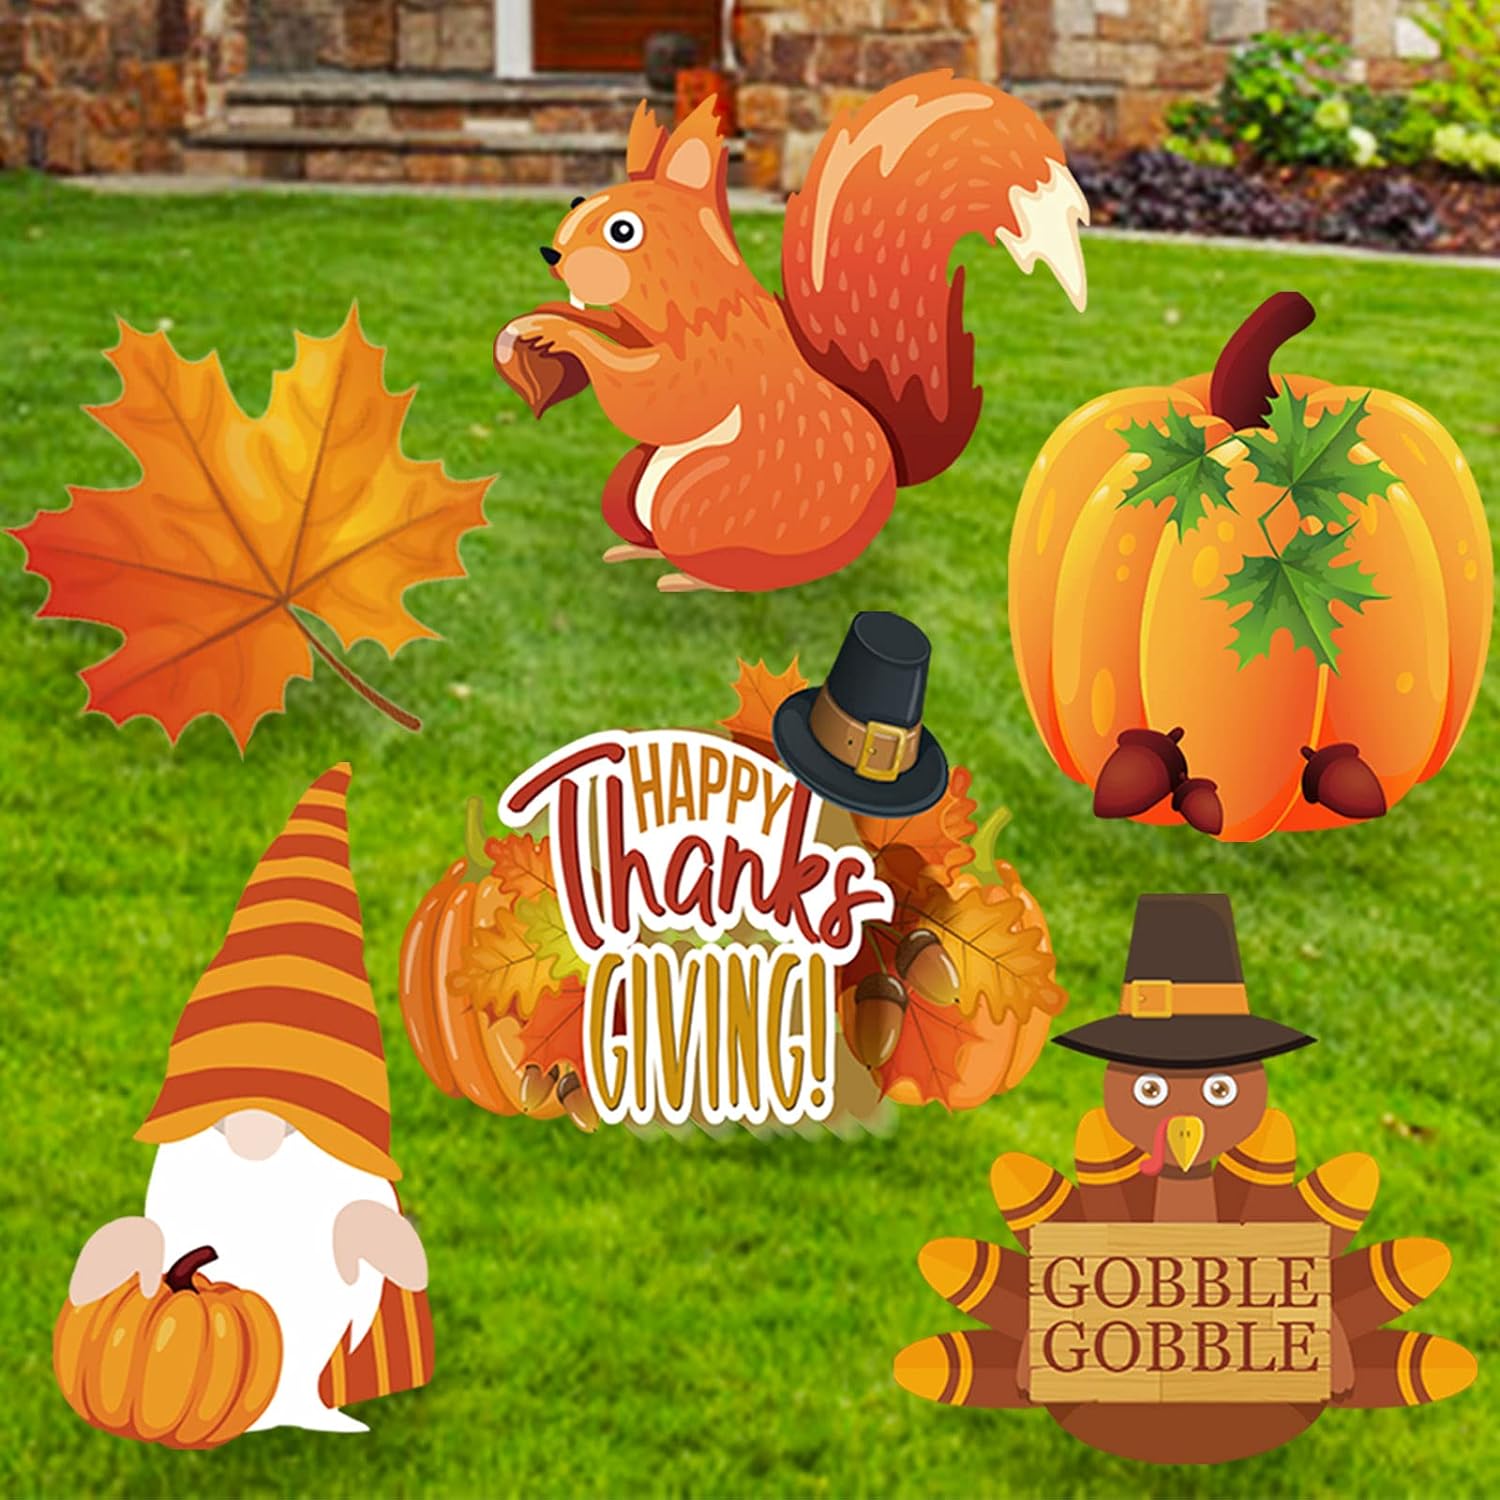 Amazon.com : Thanksgiving Yard Signs Stakes Outdoor Decorations - 6PCS Fall Lawn Decorations Signs - Maple, Squirrel, Turkey, Gnome, Pumpkin Corrugated Yard Decorations for Fall Thanksgiving Decorations Outside : Patio, Lawn  Garden